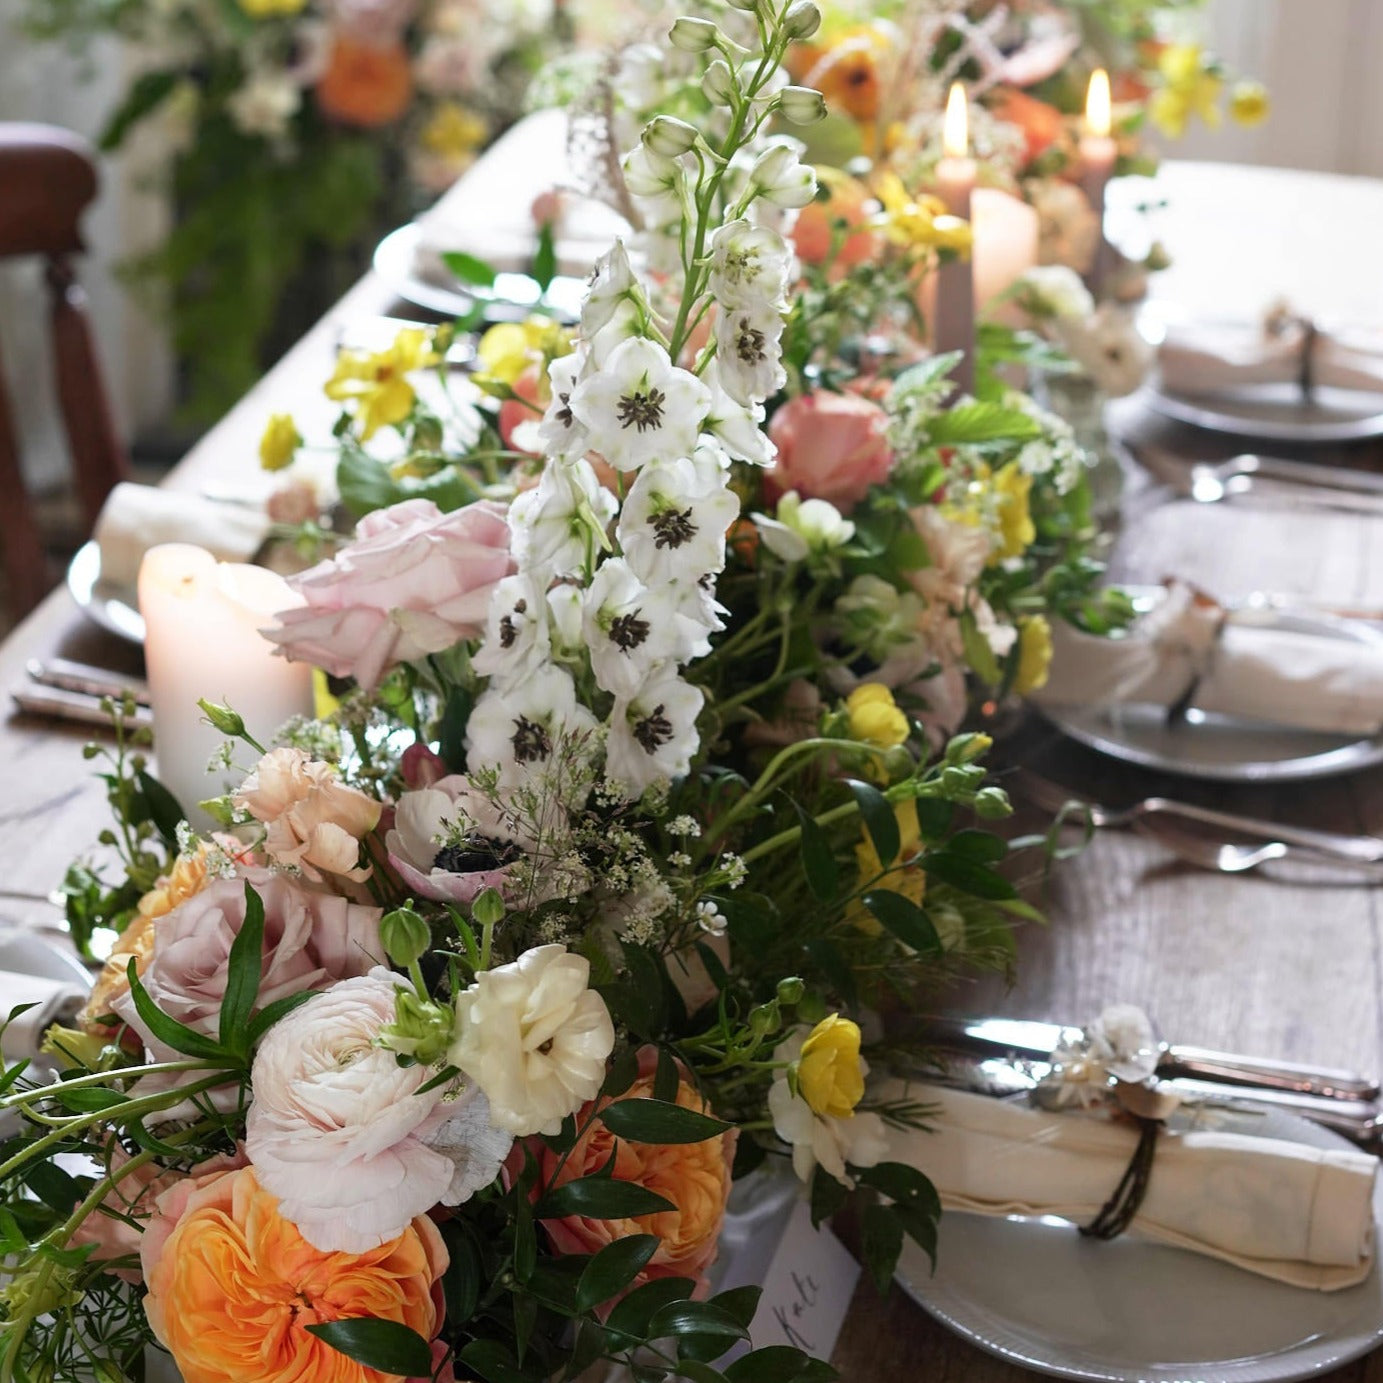 colourful and vibrant trough arrangement to dress up wedding venues and mantlepieces